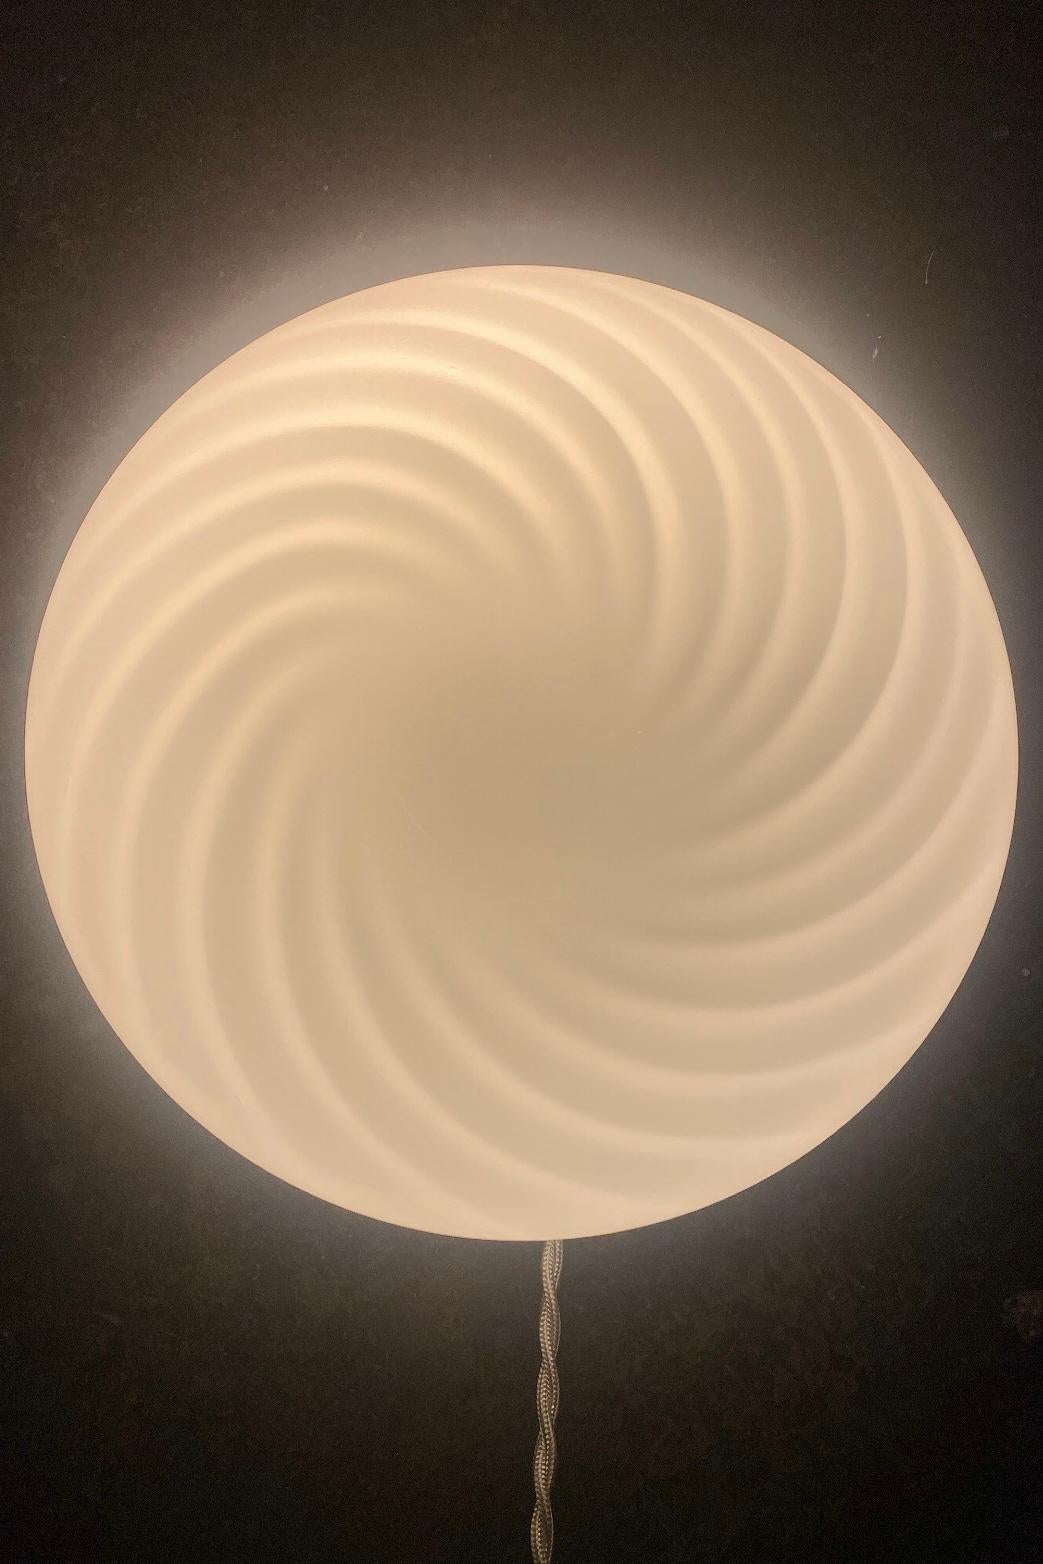 Vintage Murano plafond ceiling lamp / wall lamp. Mouth-blown white opal glass with swirl and brass color base. Handmade in Italy, 1970s. D: 25 cm⁠⁠ H: 13 cm.

